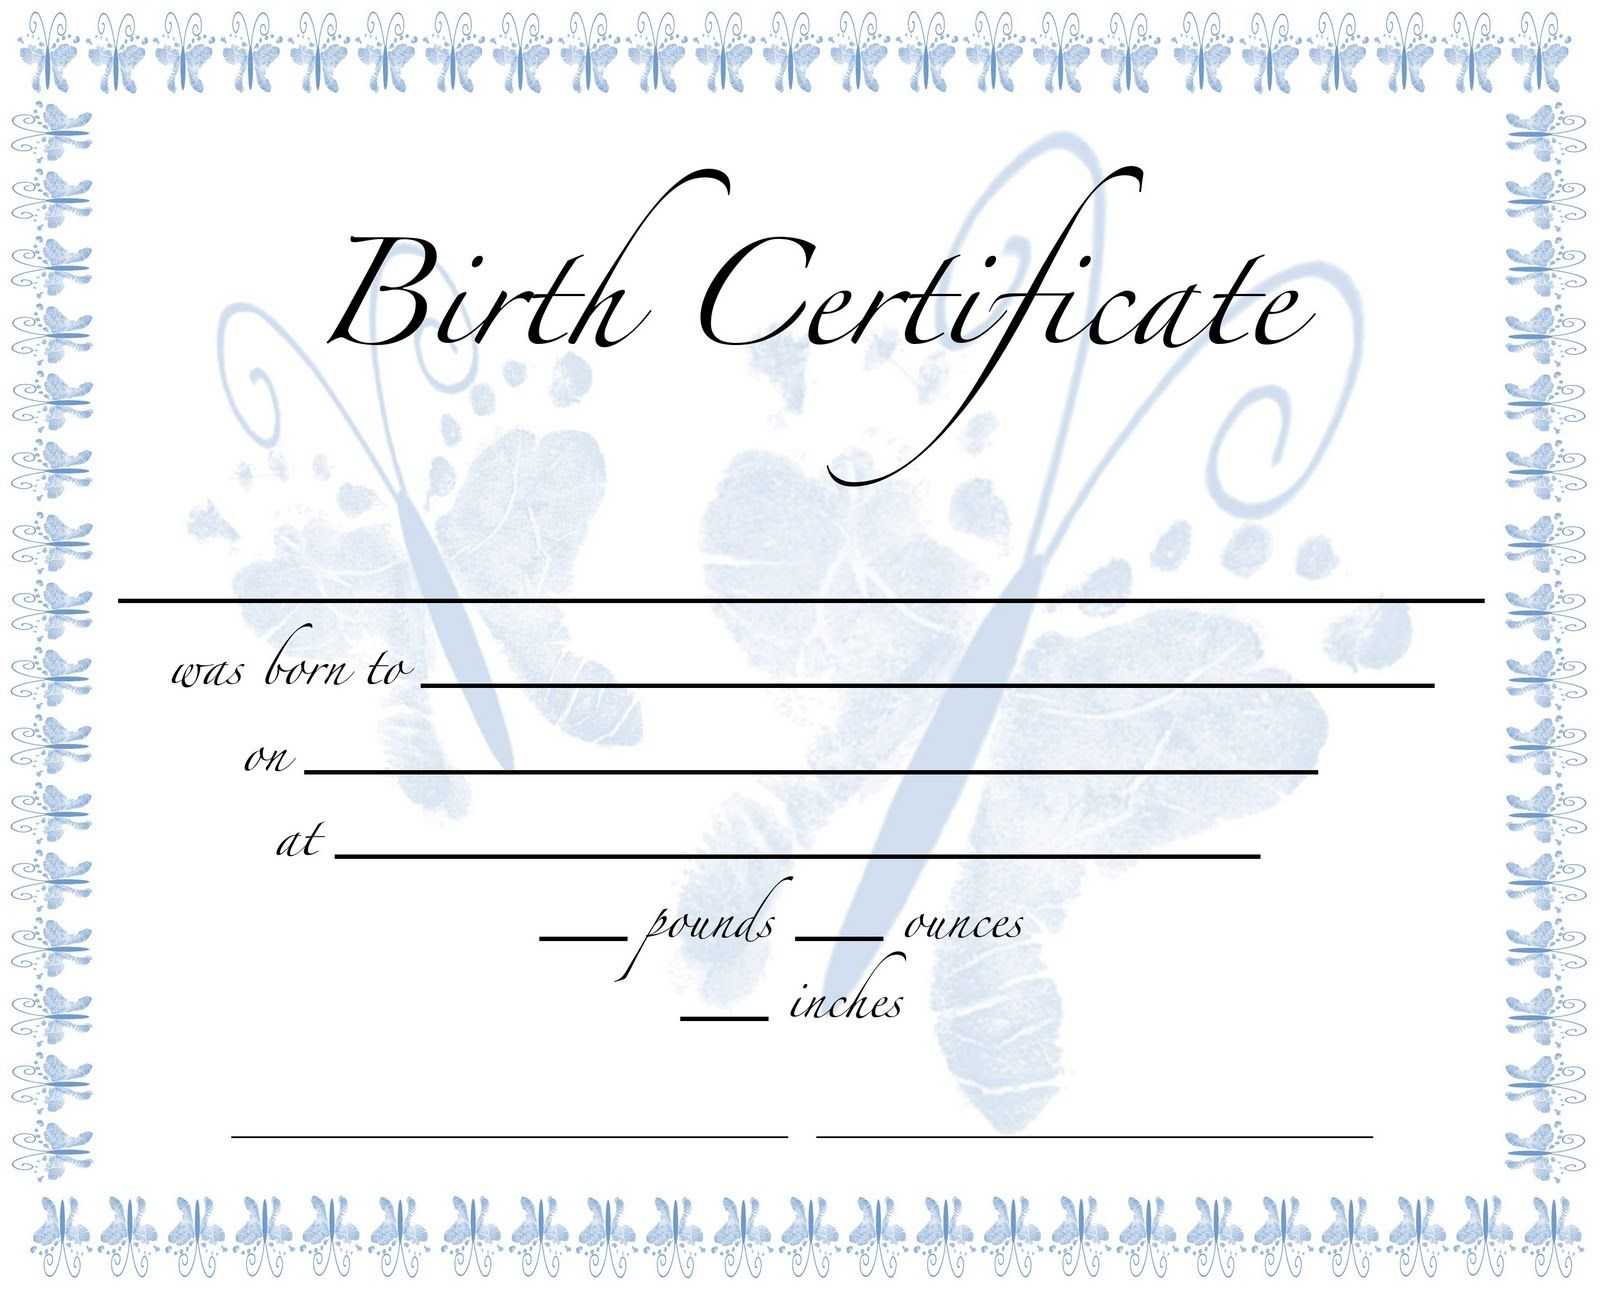 Pics For Birth Certificate Template For School Project Intended For Certificate Templates For School